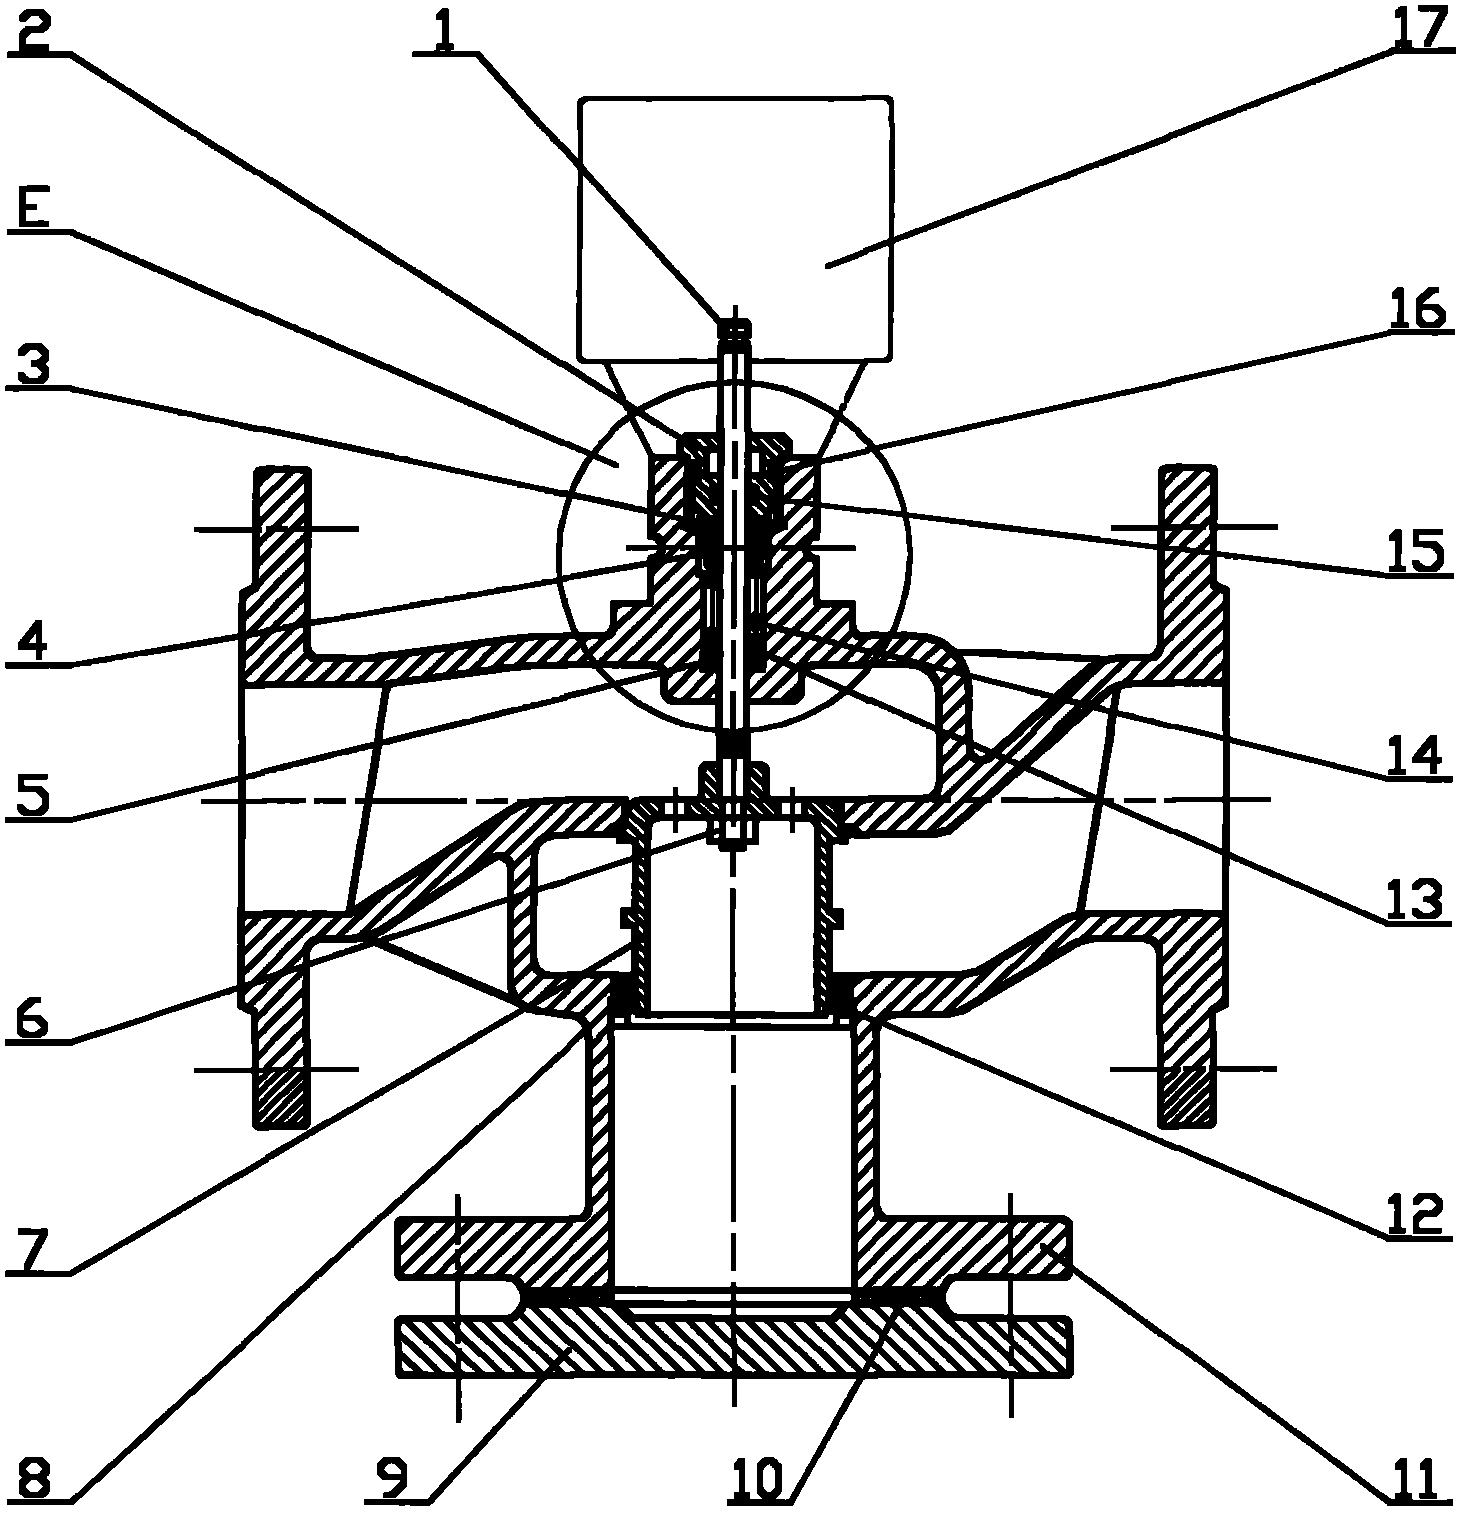 Electromagnetic valve with differential pressure resistance valve core